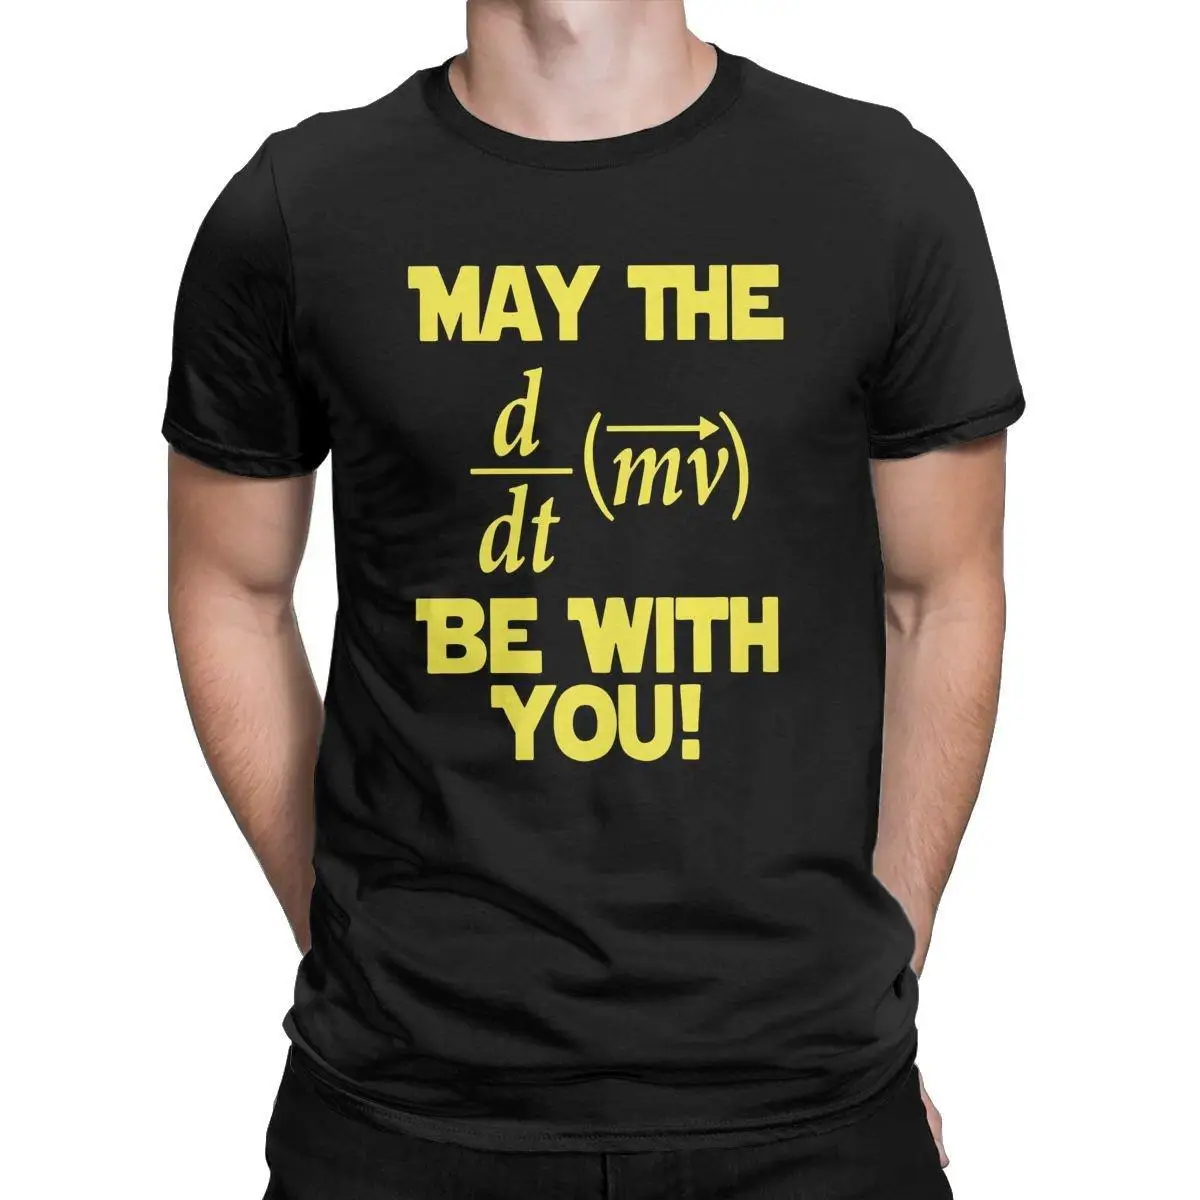 Men's T-Shirts May The Force Be With You Awesome Cotton Tees Short Sleeve Physics Geek T Shirts Round Collar Clothing Summer